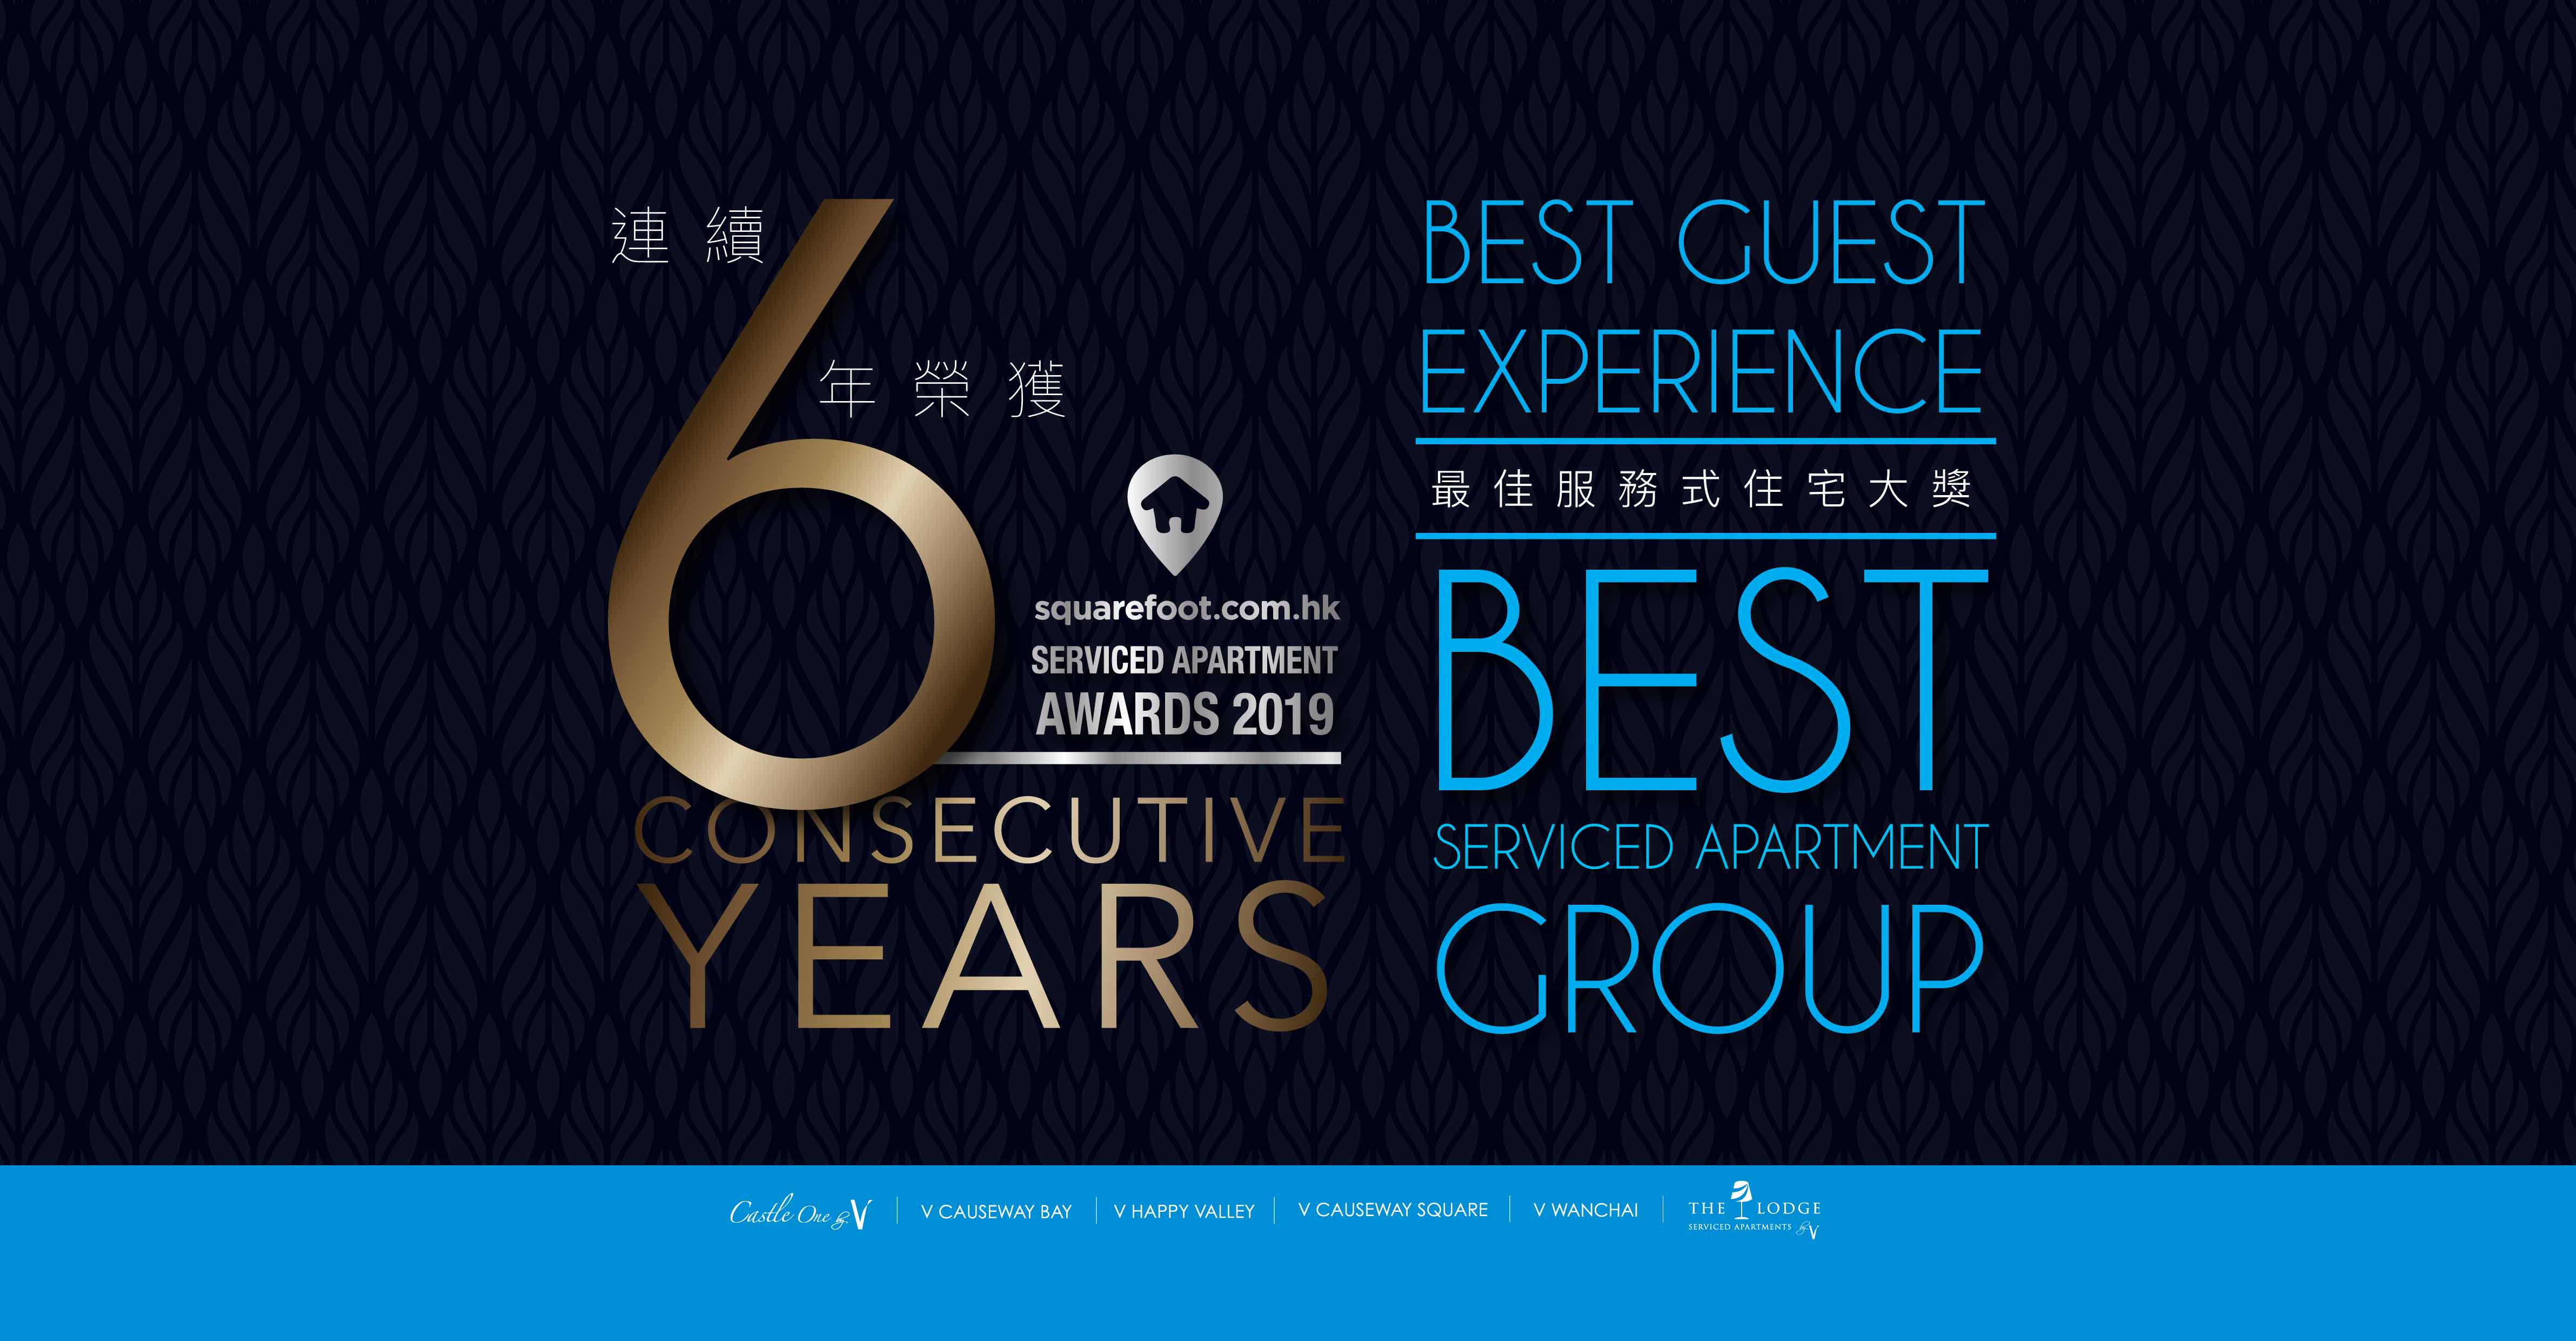 Best Serviced Apartment Group & Best Guest Experience Award | The V Group